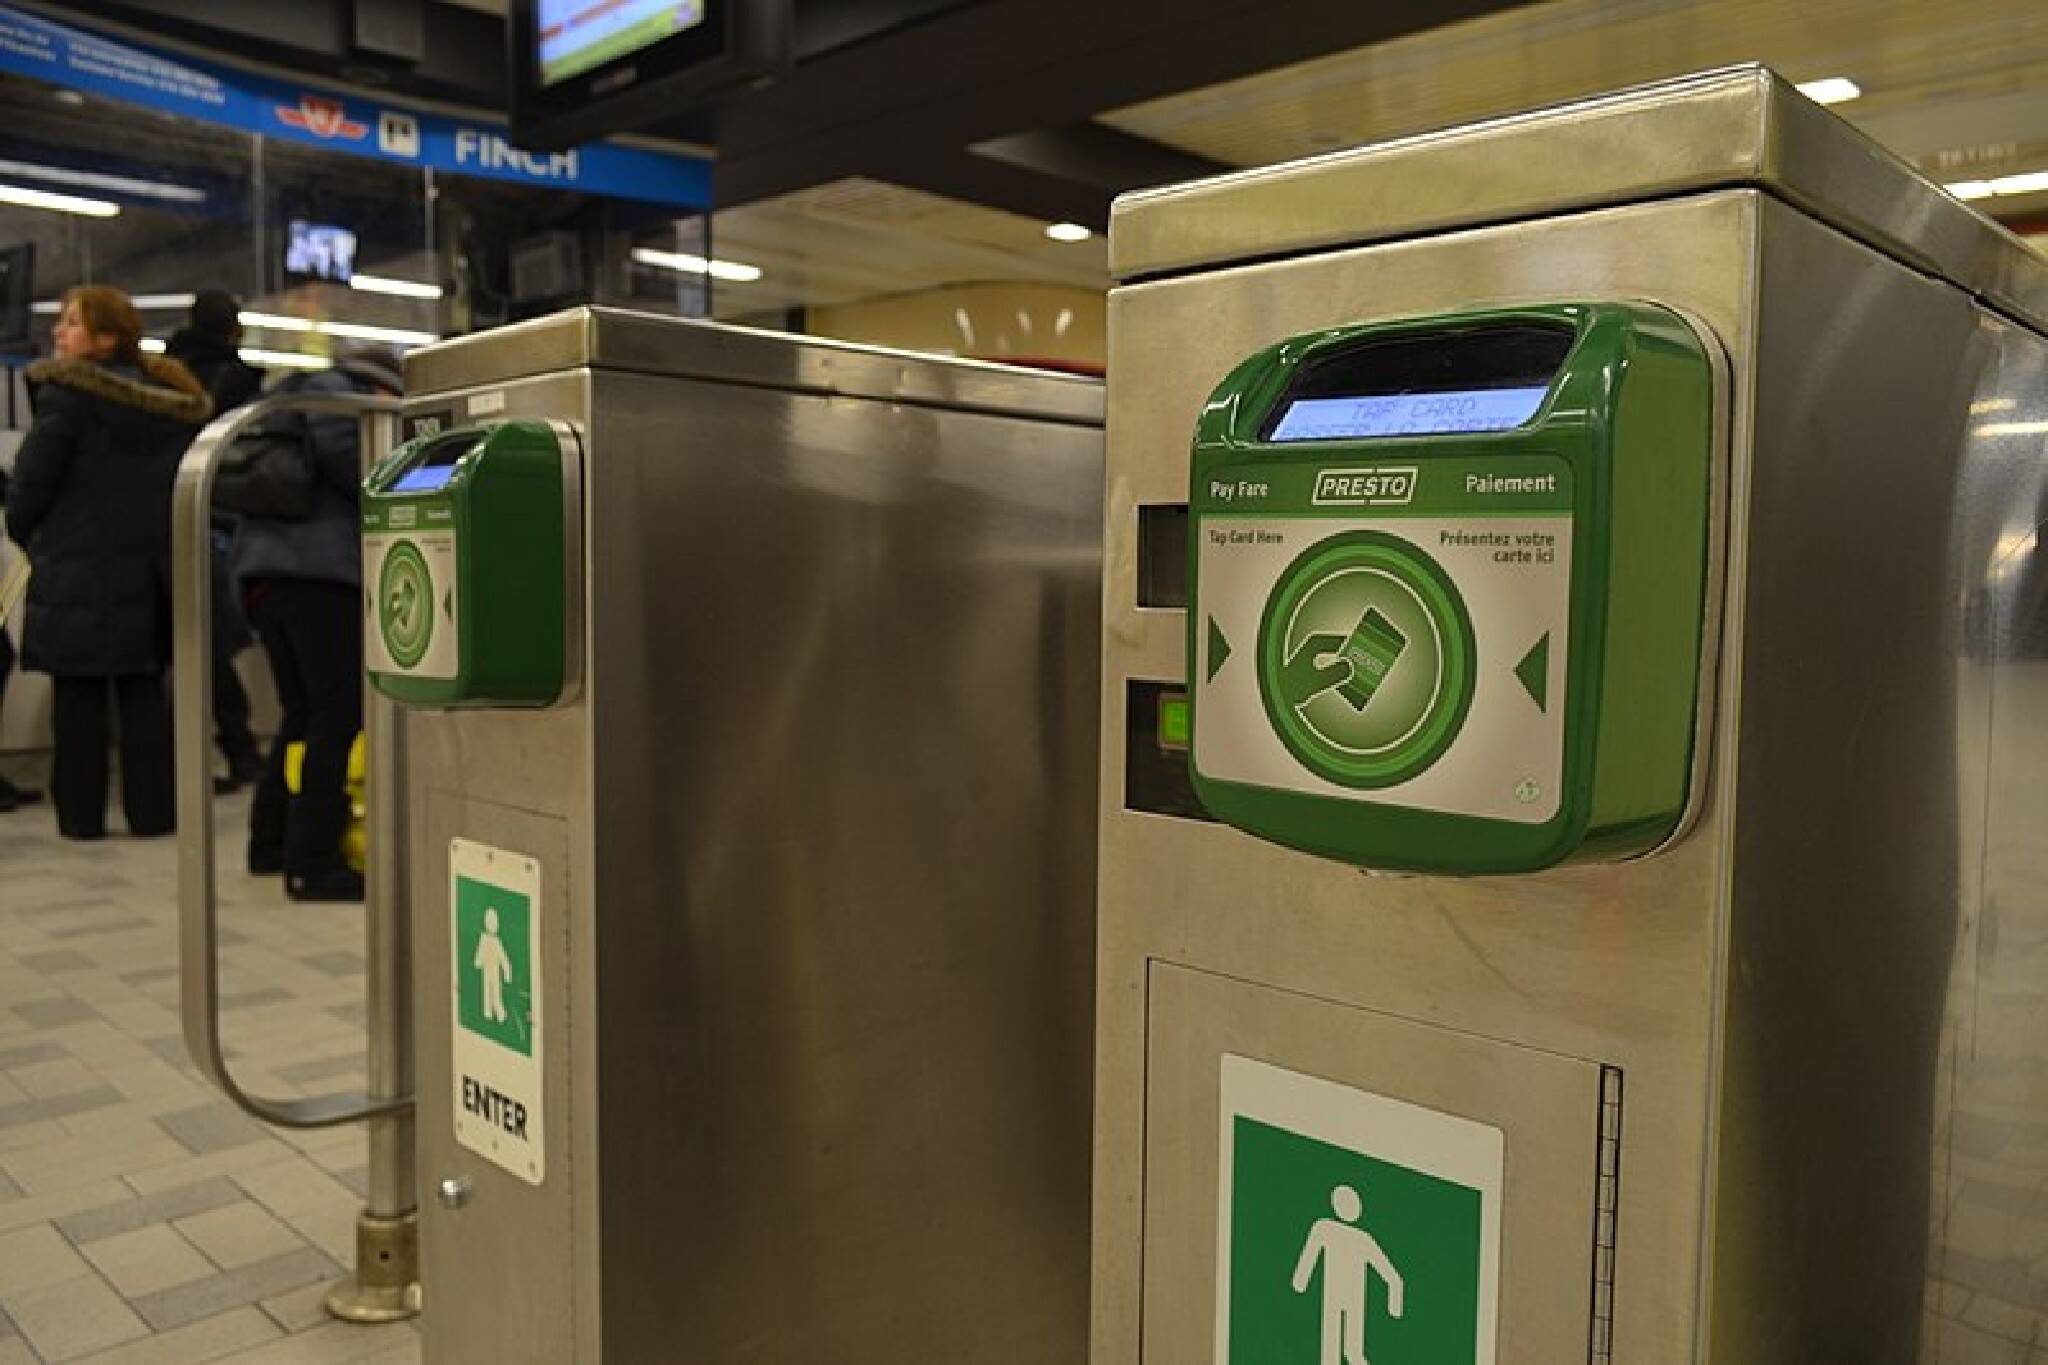 toronto-is-furious-about-metrolinx-s-claim-that-presto-cards-rarely